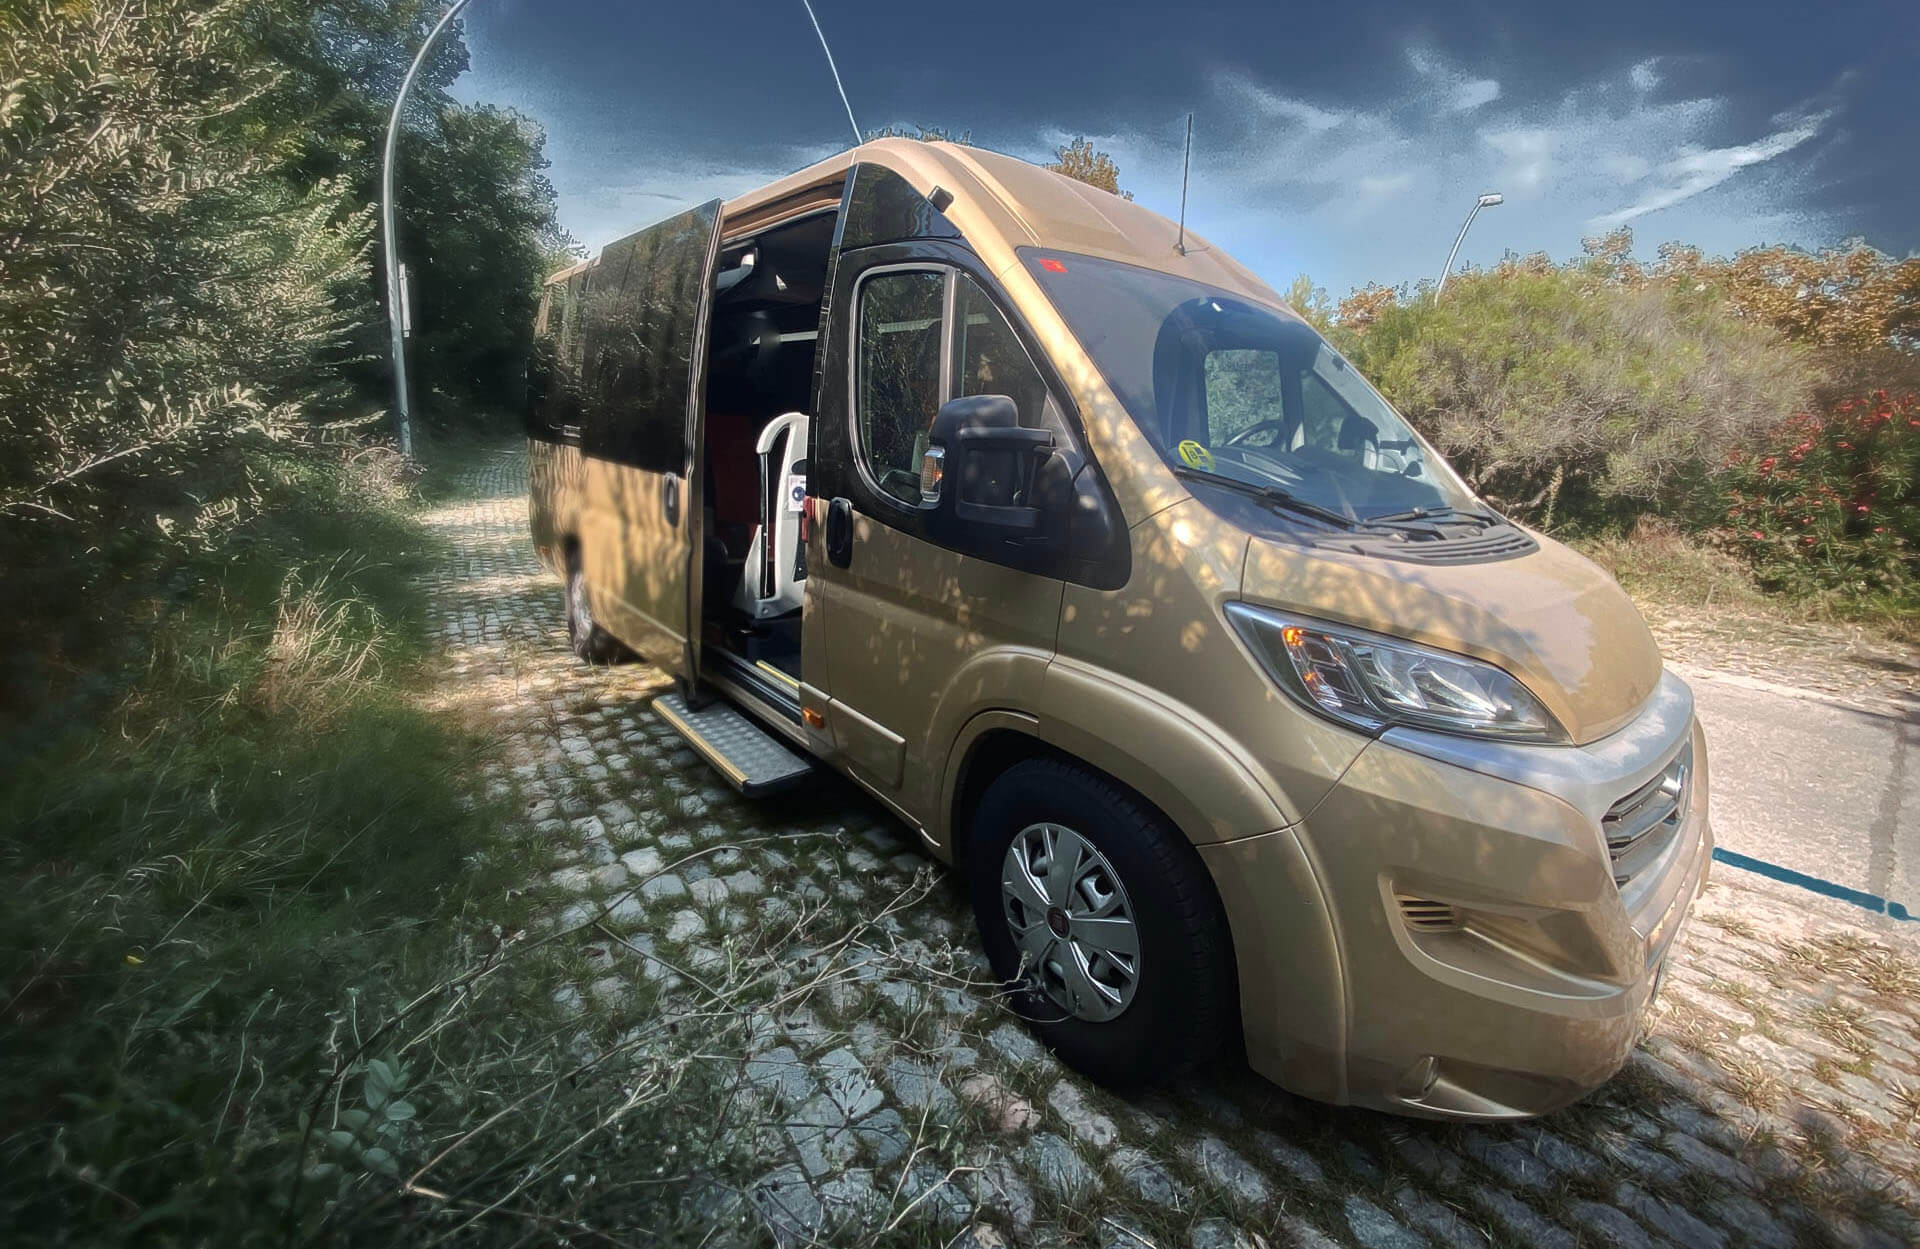 Rent a 13 seater Microbus (Fiat Ducato 2016) from Bcn City Bus Tour s.l. from Viladecavalls 